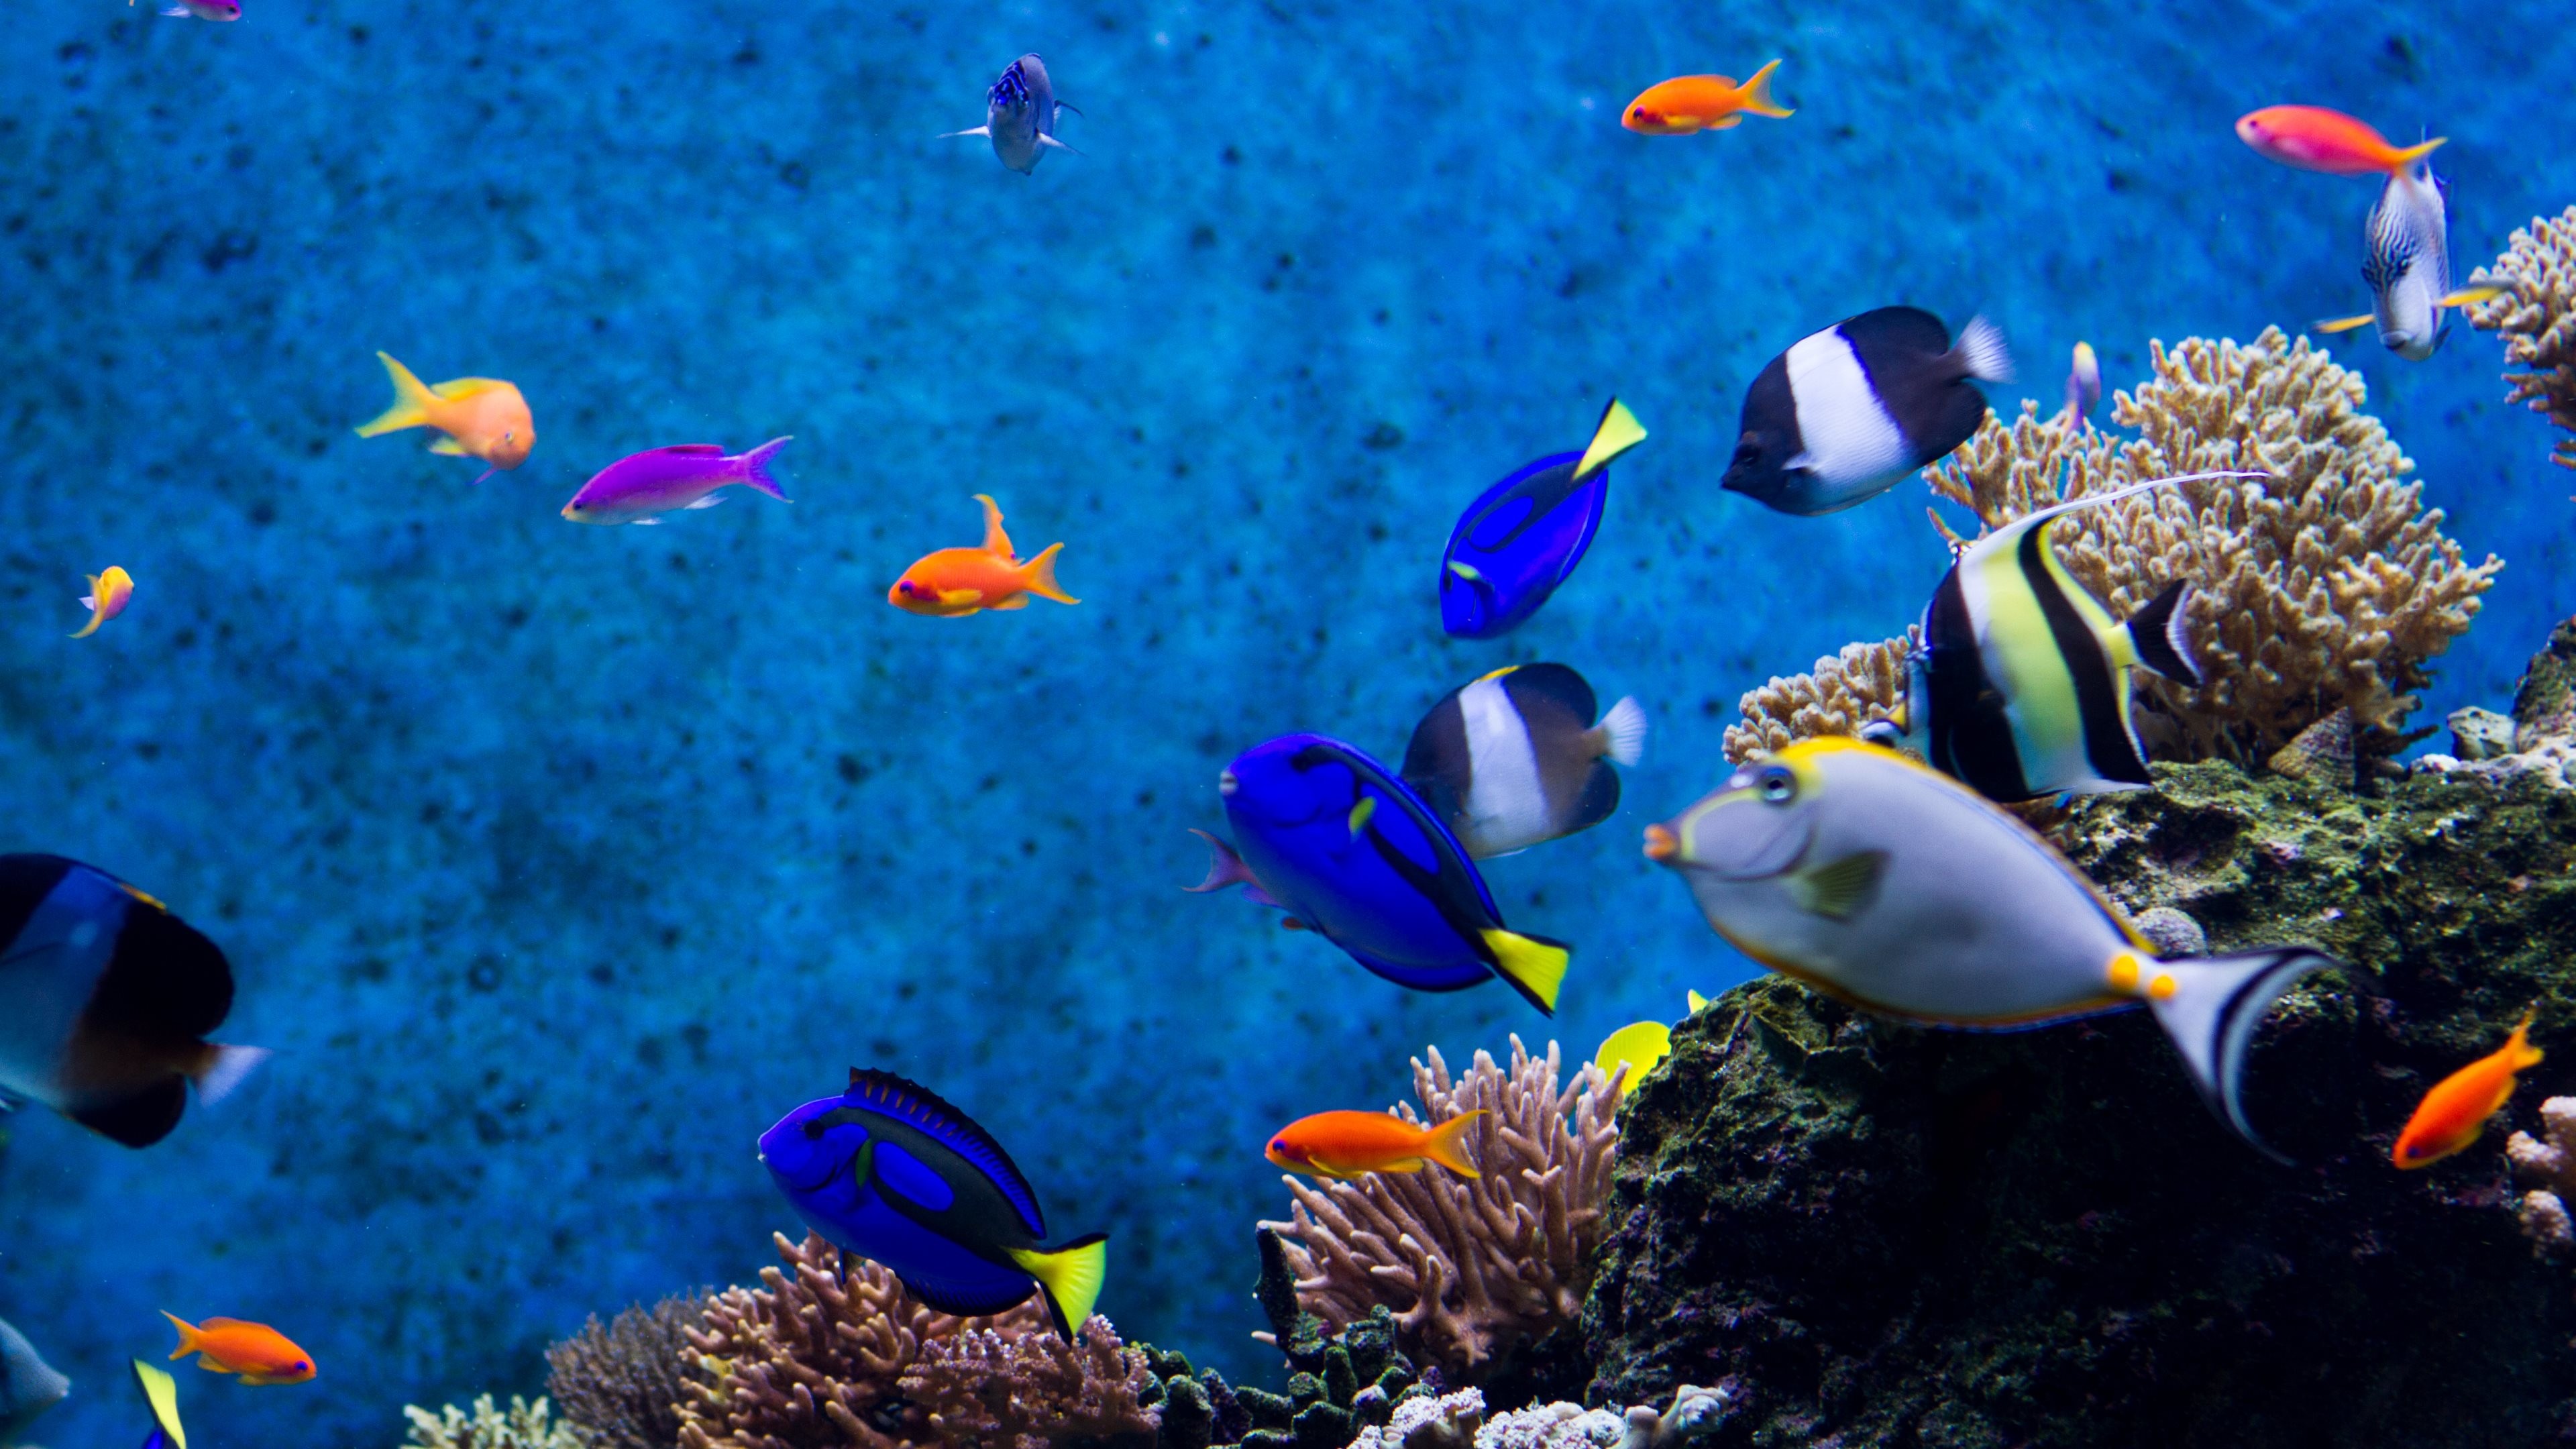 Coral Reef Backgrounds (54+ images)